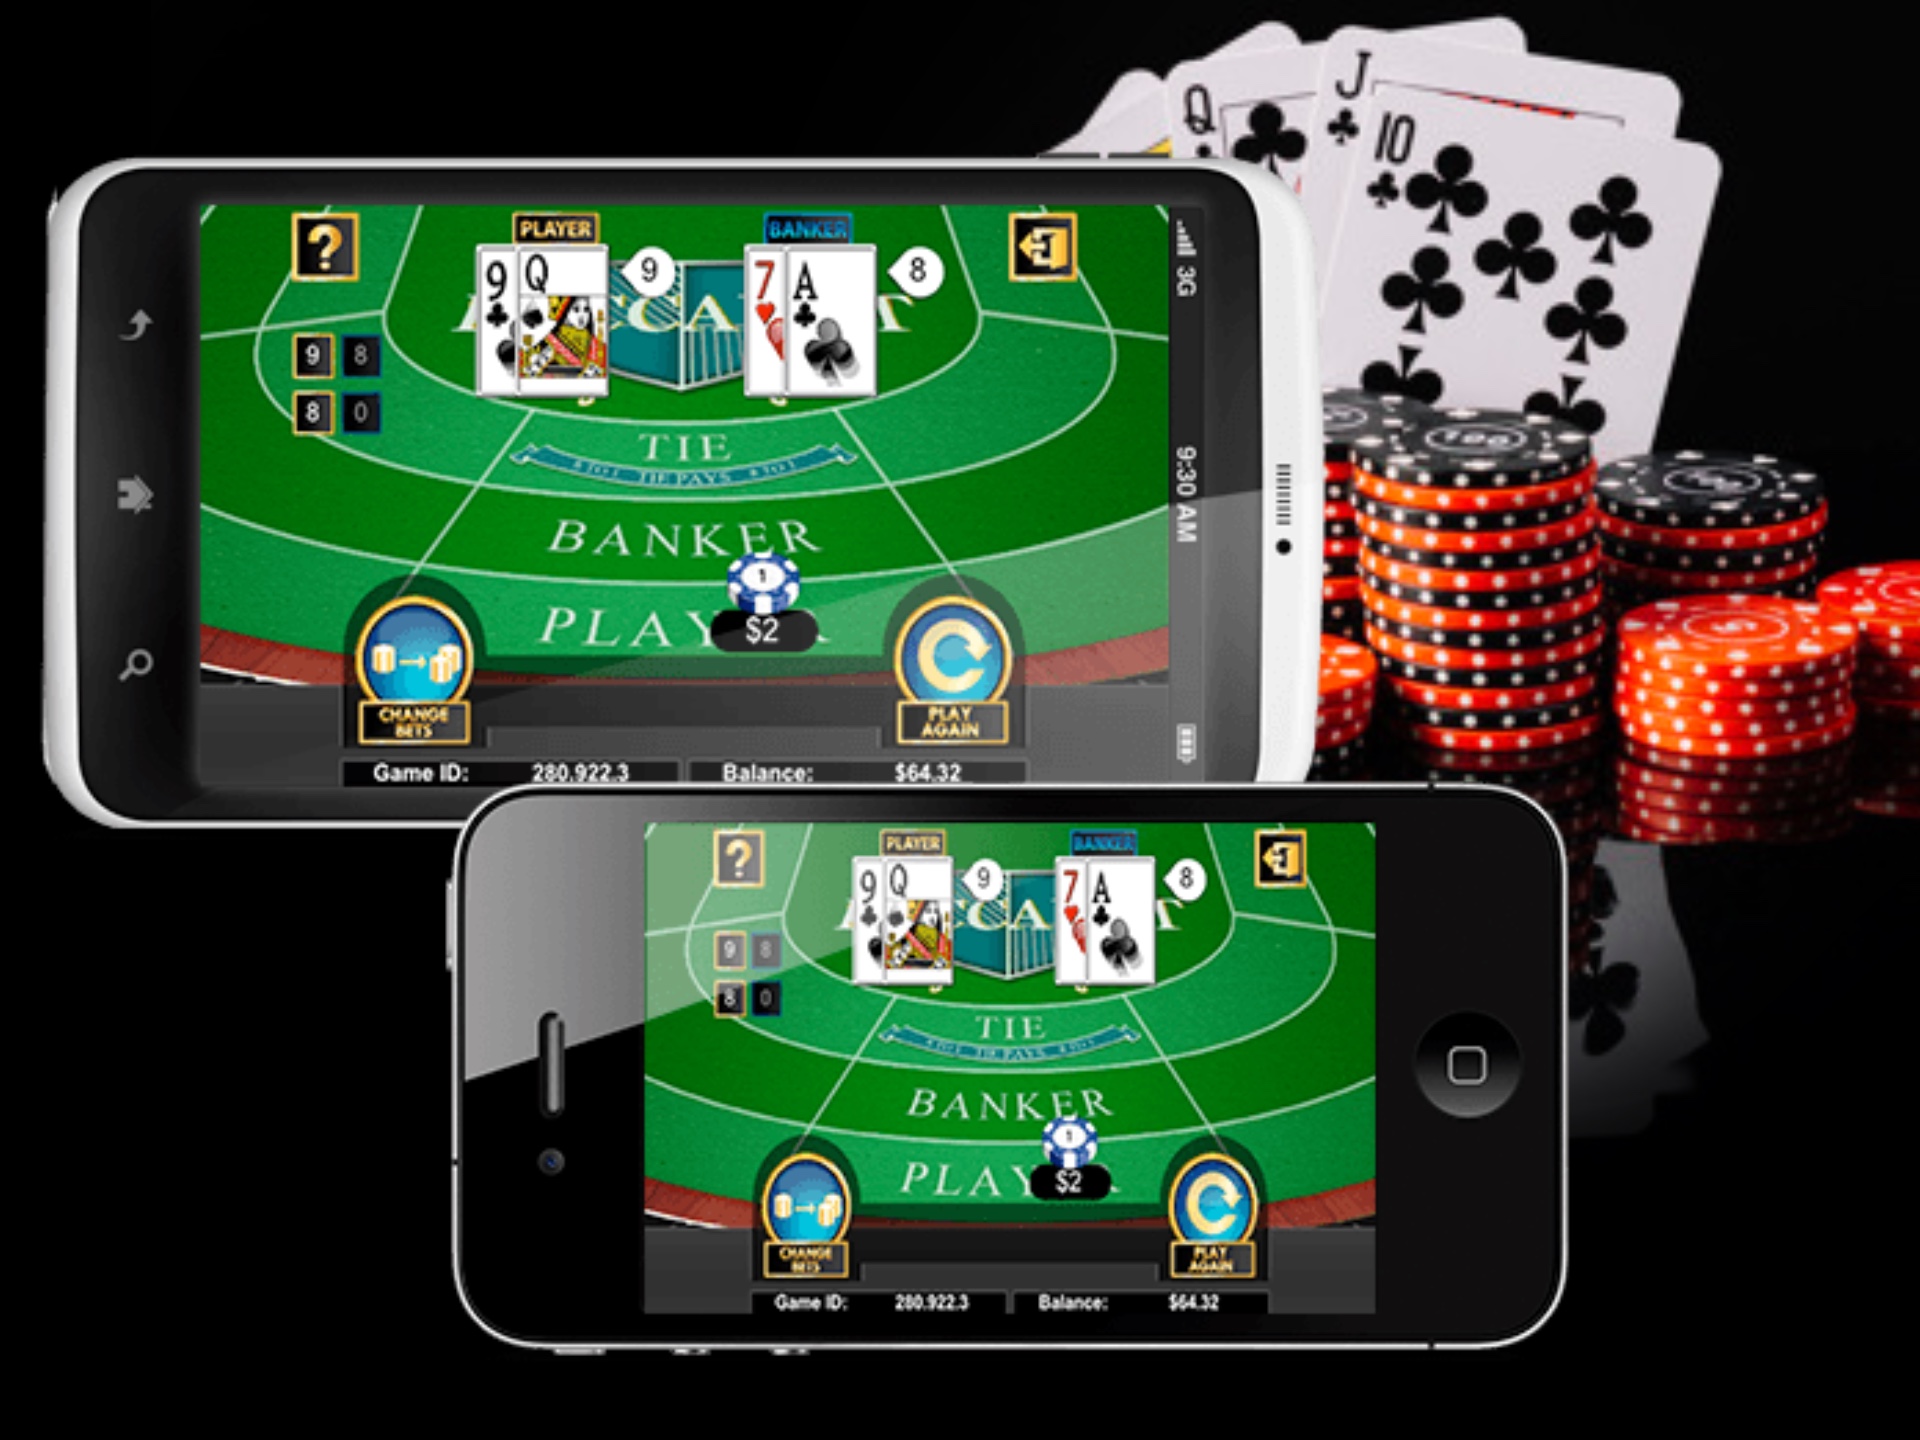 Download and install the mobile app and play baccarat online.